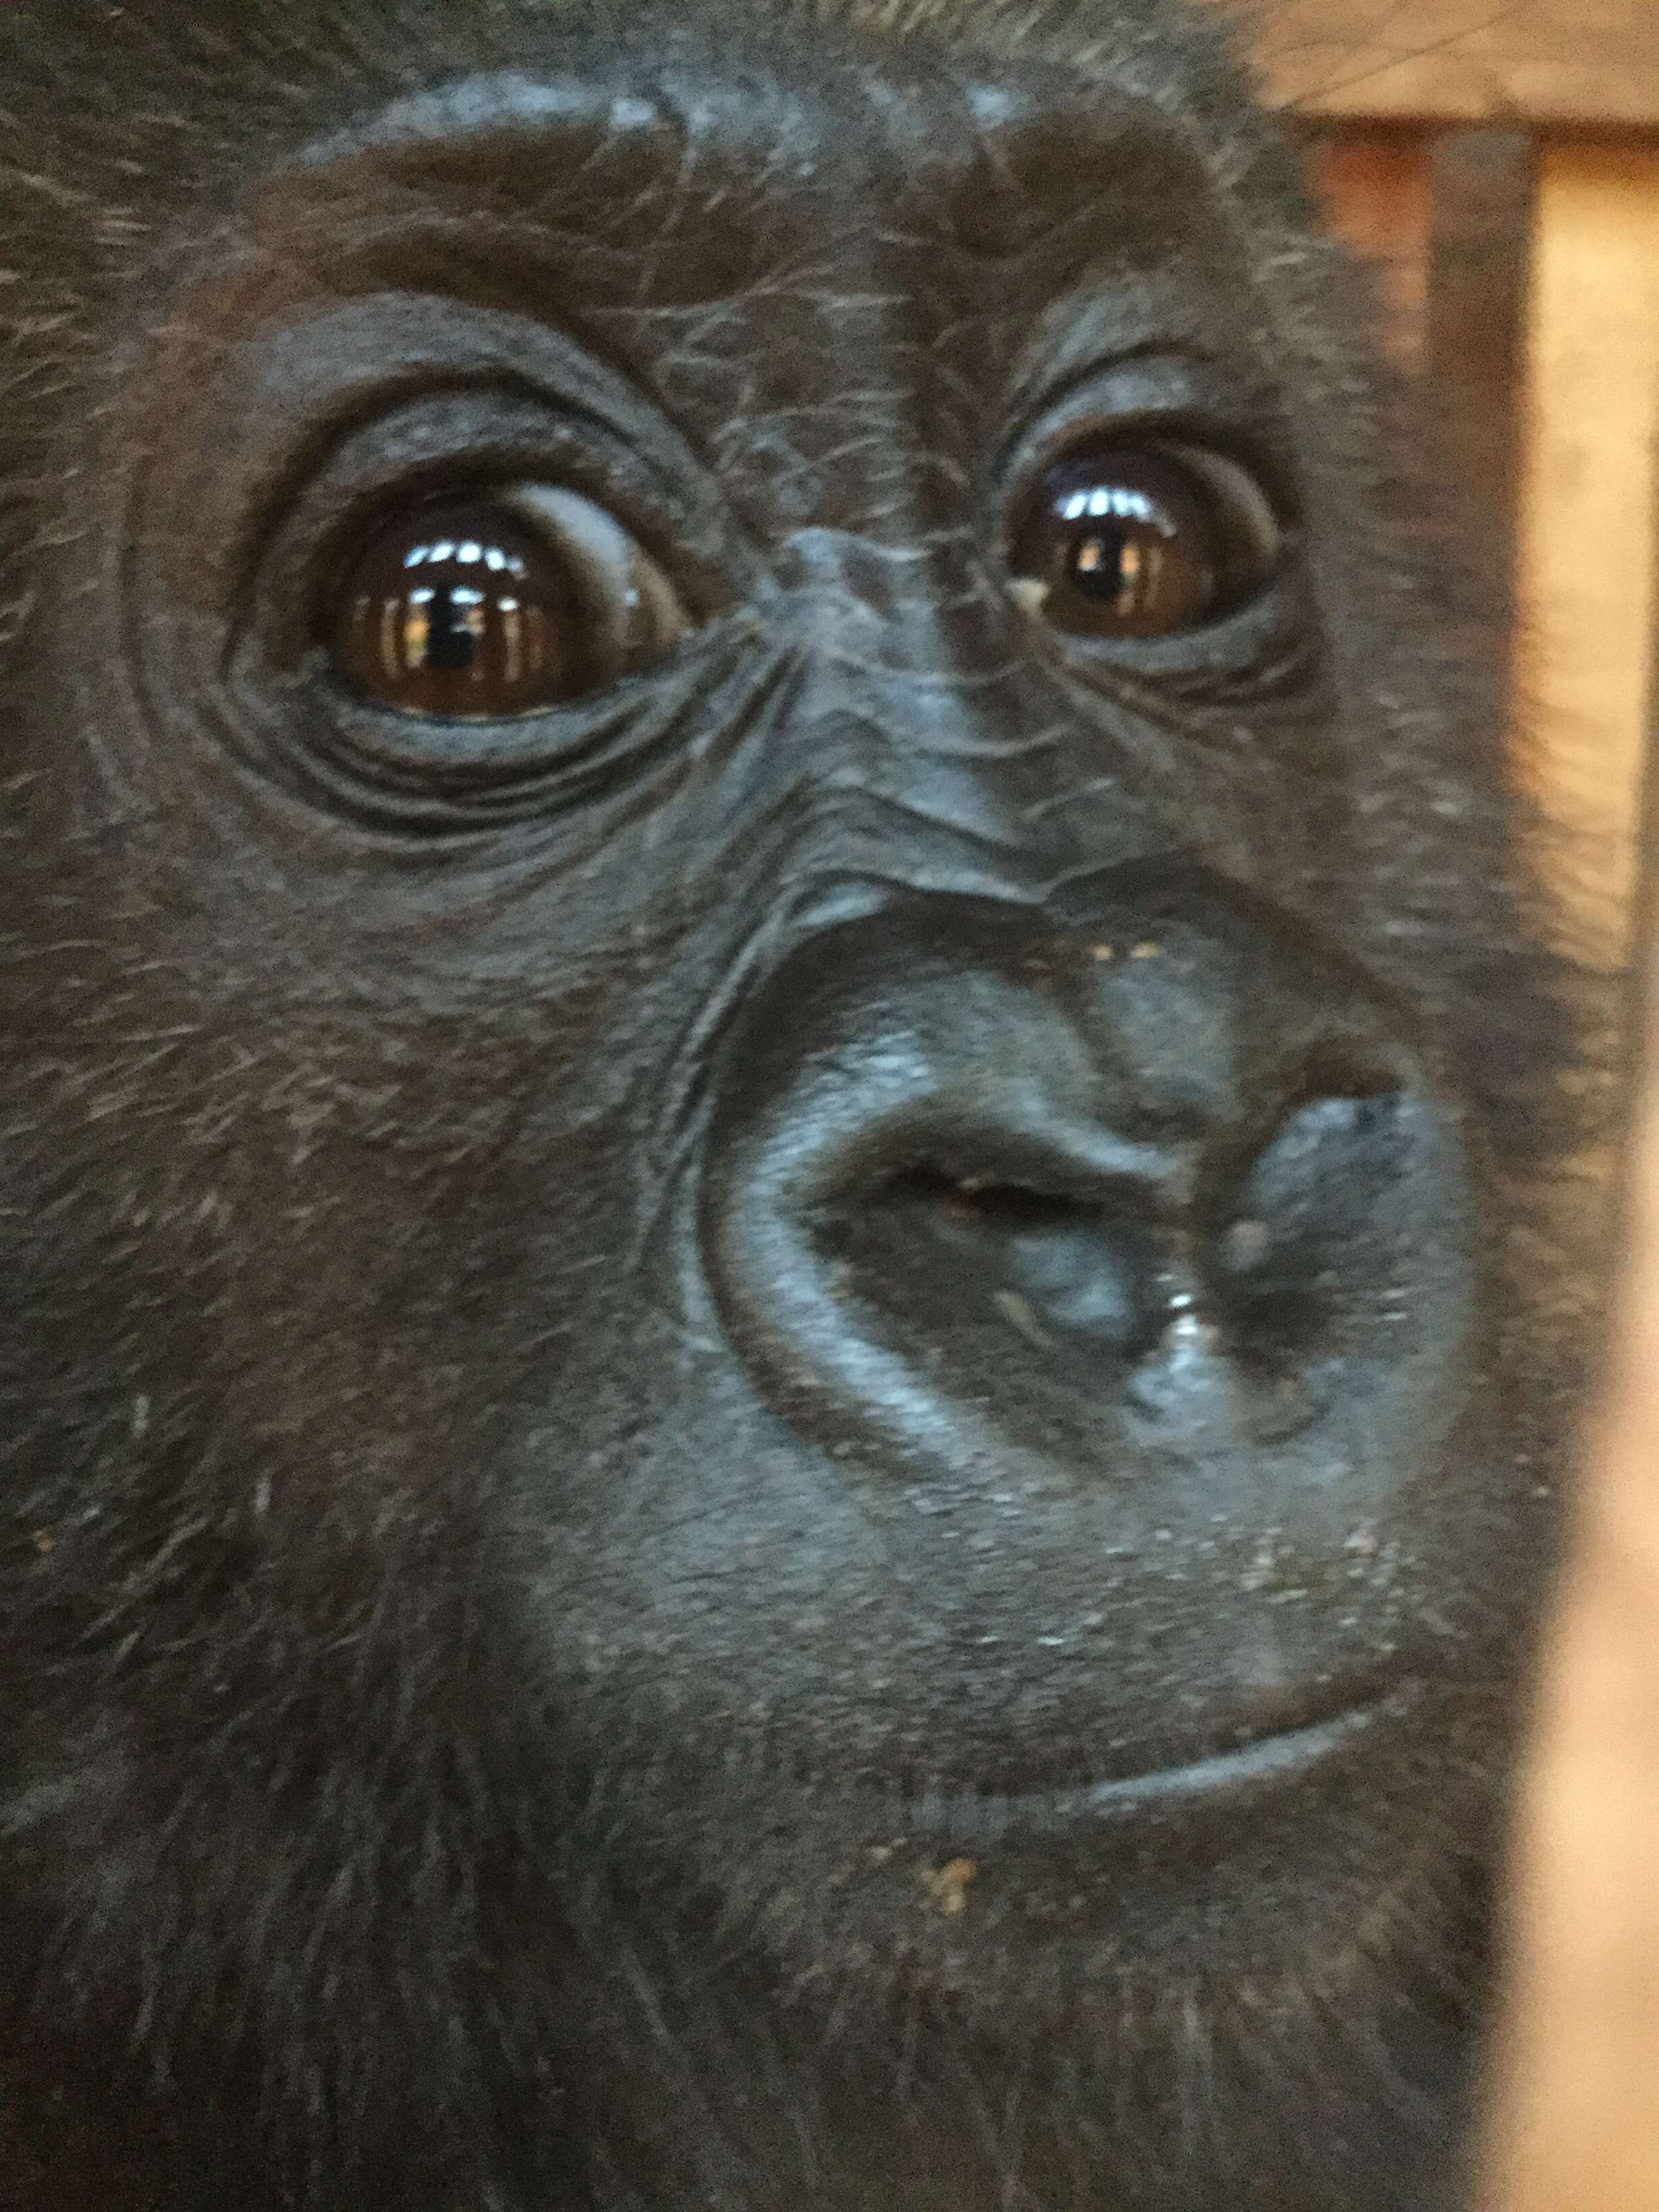 Orphaned baby gorilla rescued in Cameroon